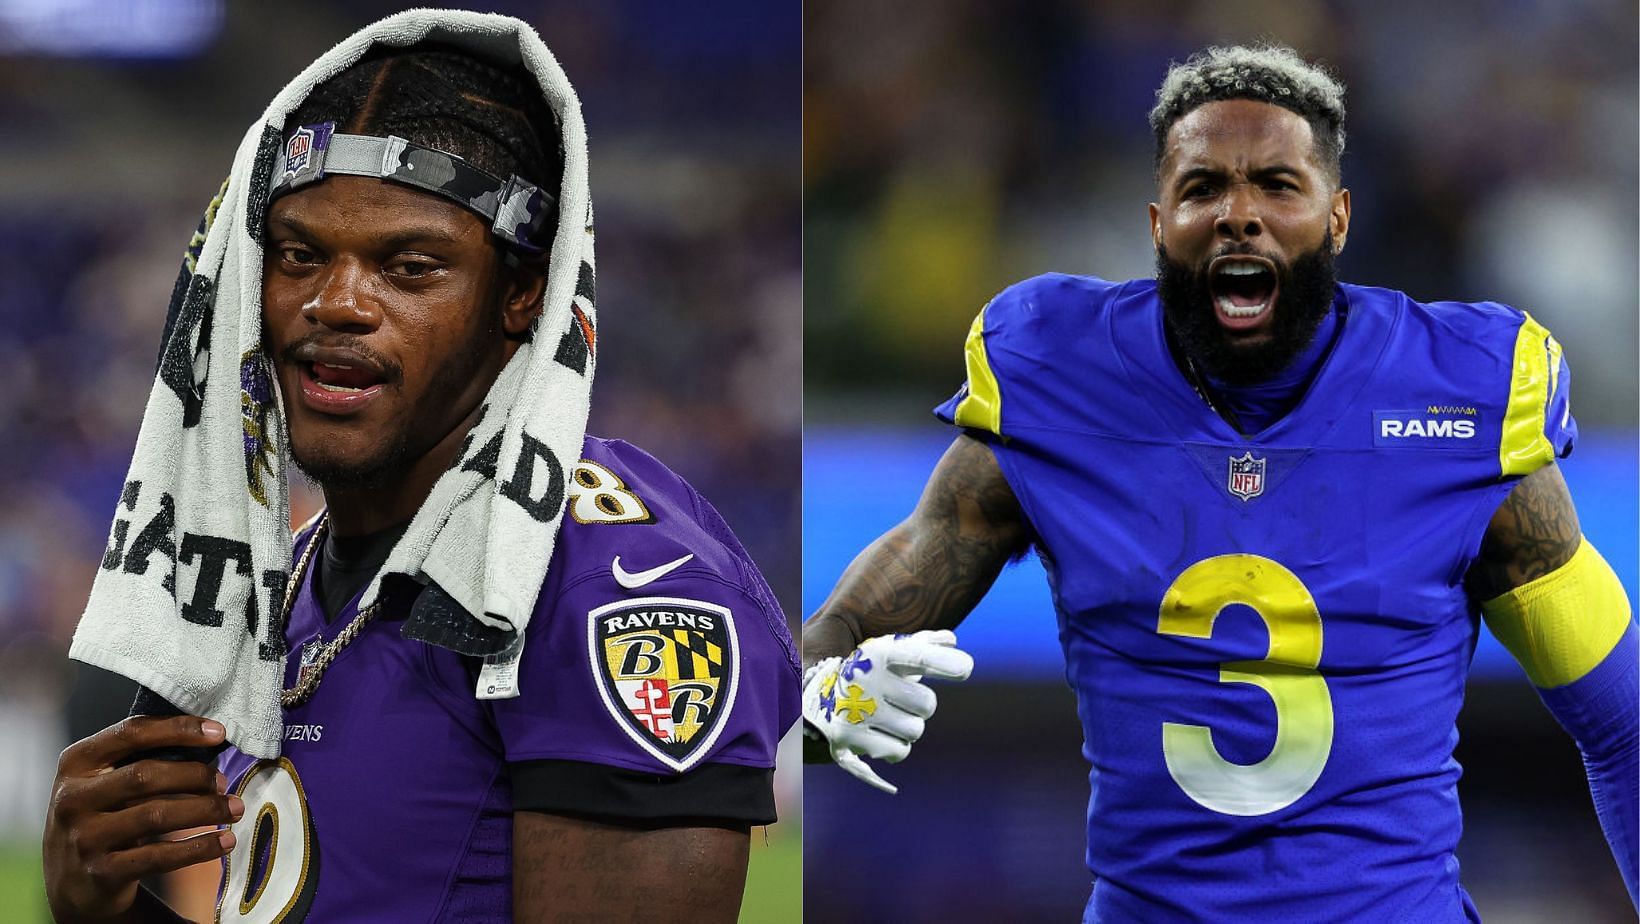 Lamar and Odell should team up in Baltimore